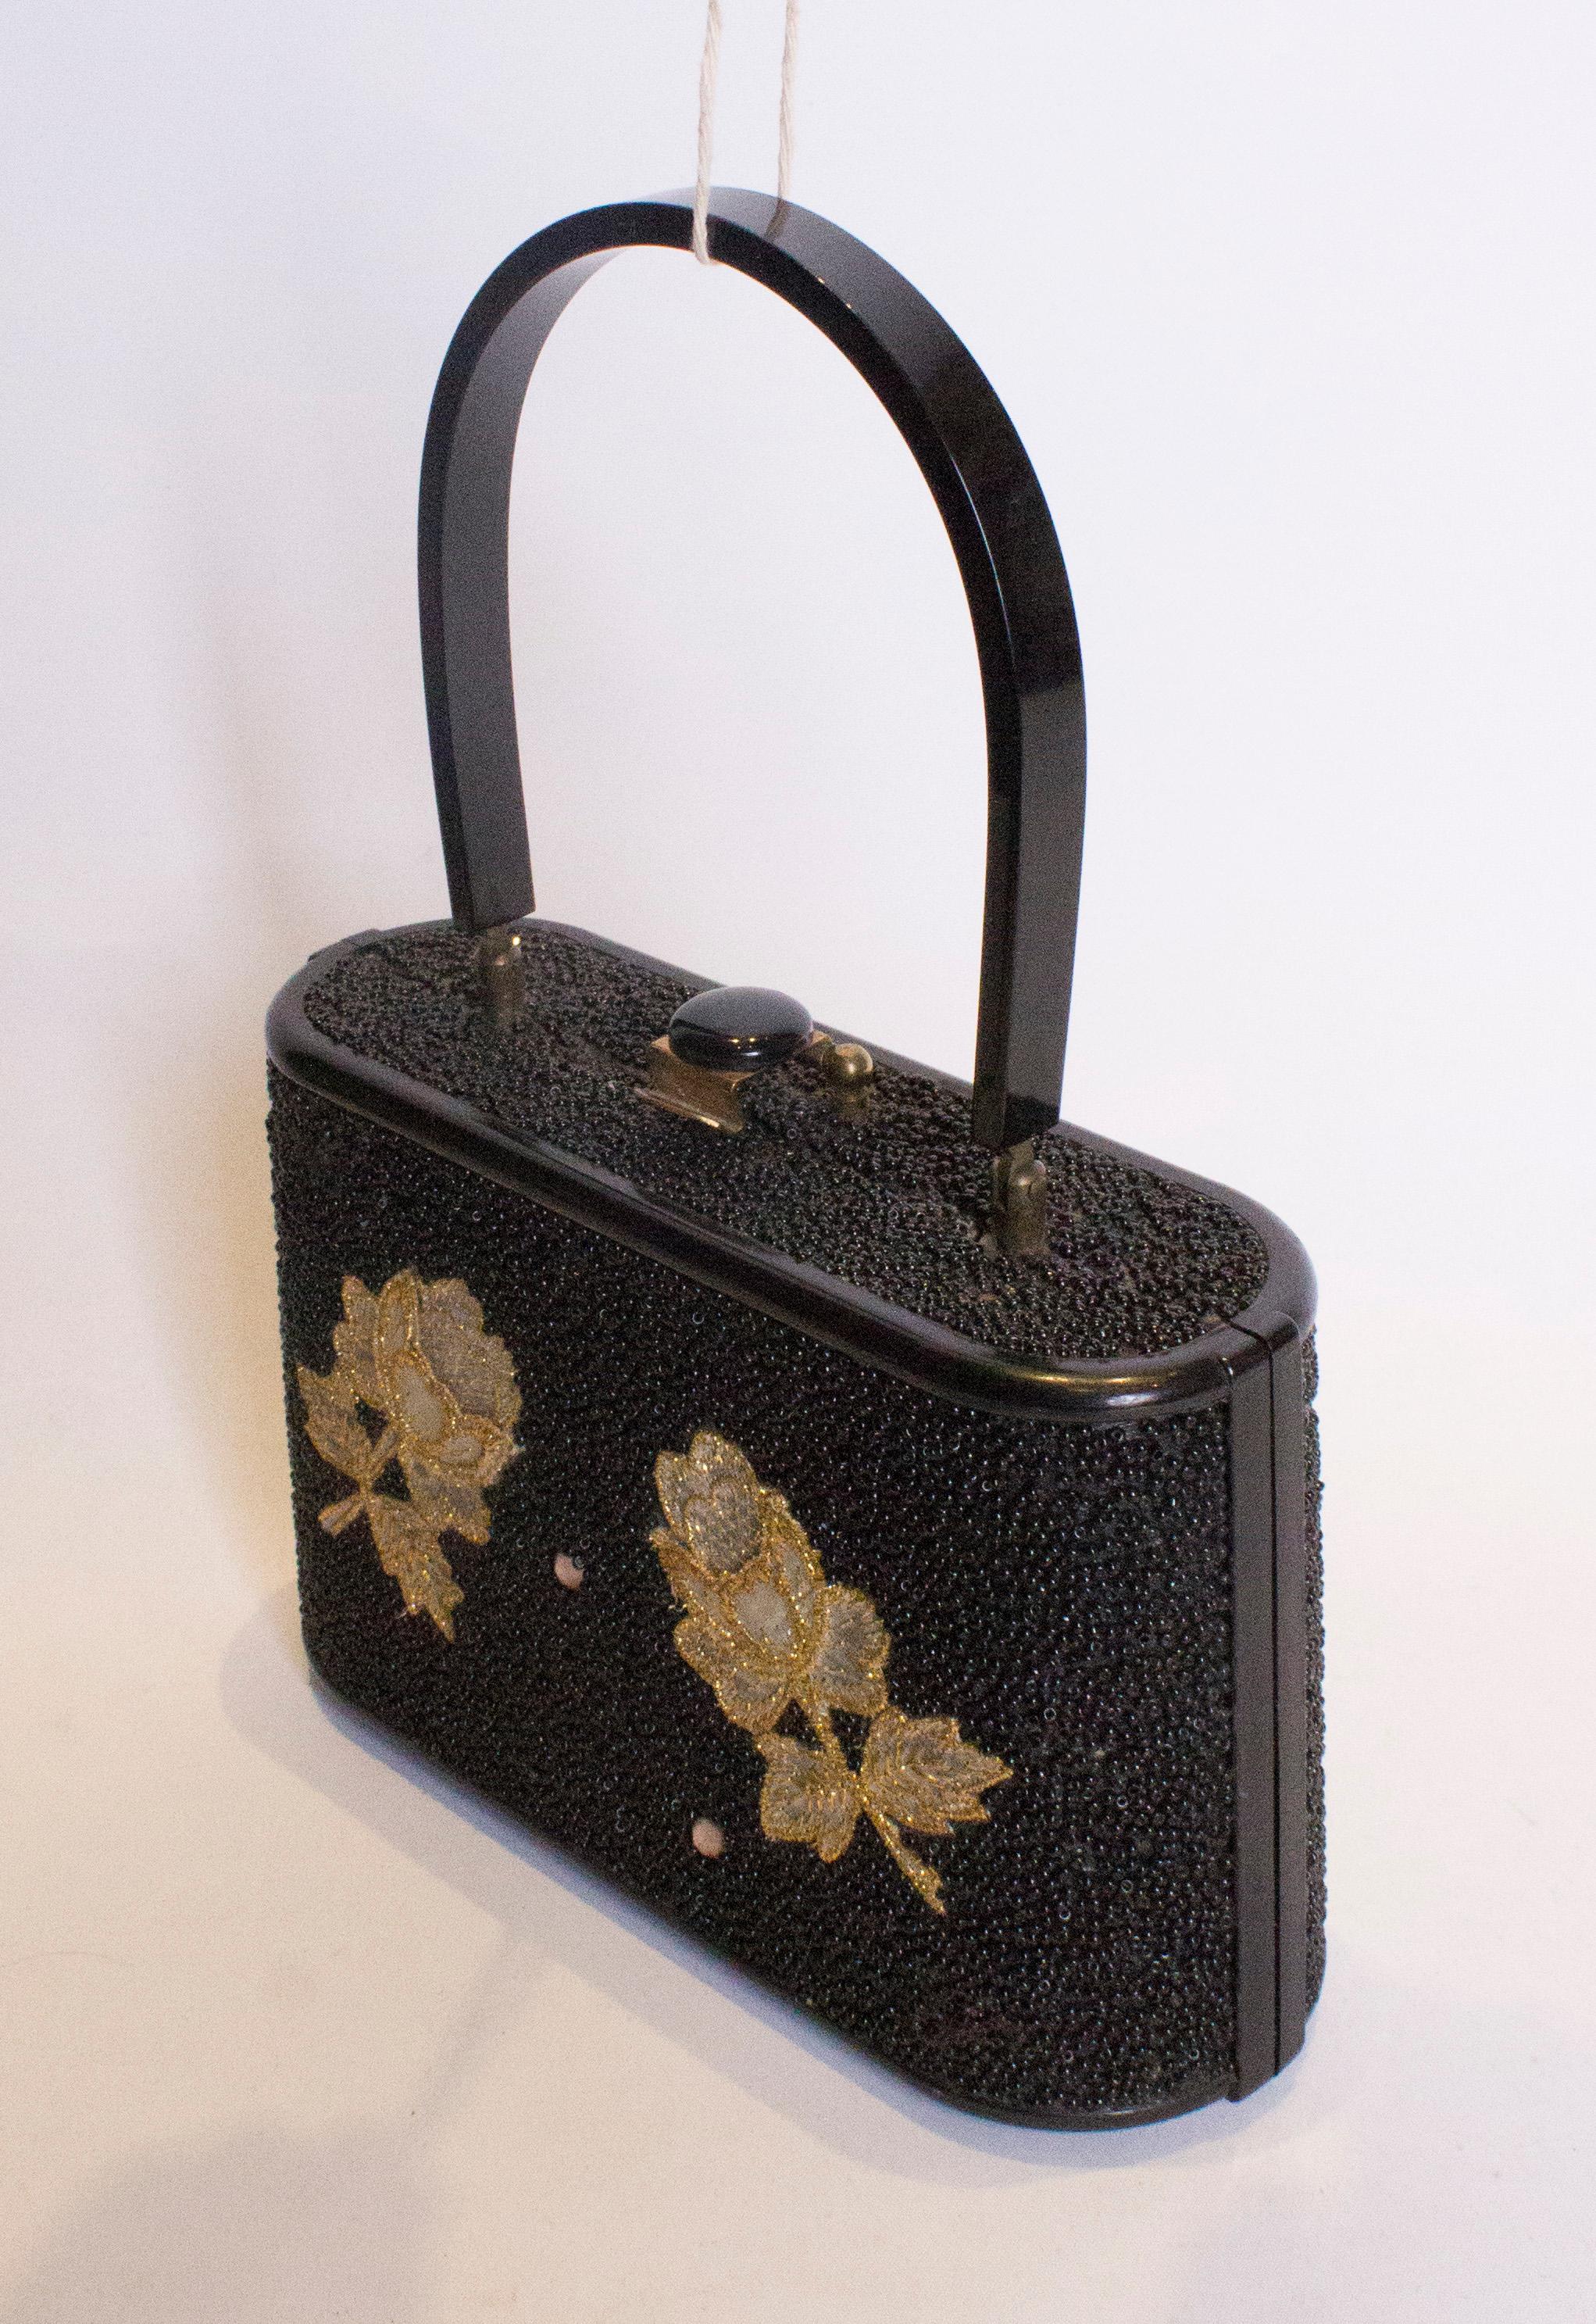 A stunning beaded bag with floral fabric decoration.The bag has a top handle and central top opening.
Measurements: width 9'', height 5 1/4'' , depth 3''